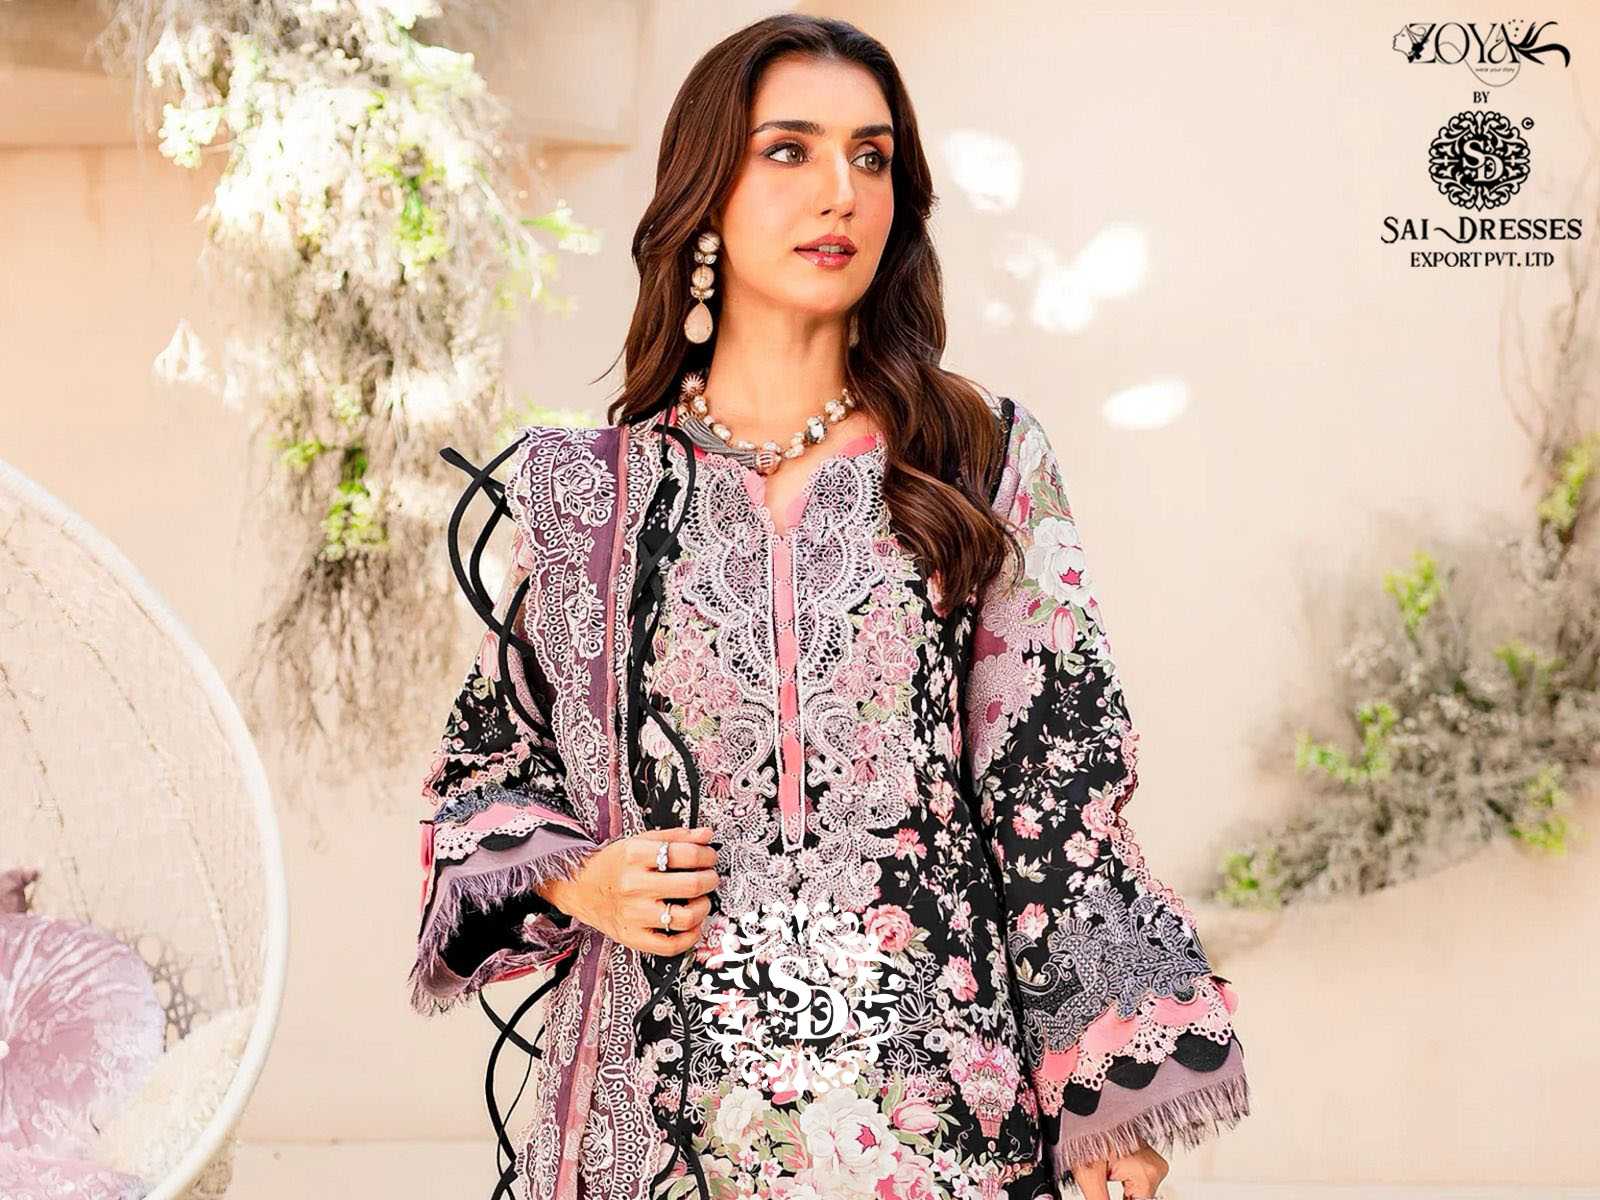 SAI DRESSES PRESENT NEEDLE WONDER PREMIUM PARTY WEAR PURE COTTON PATCH EMBROIDERED BEAUTIFUL PAKISTANI DESIGNER SALWAR SUITS IN WHOLESALE RATE IN SURAT